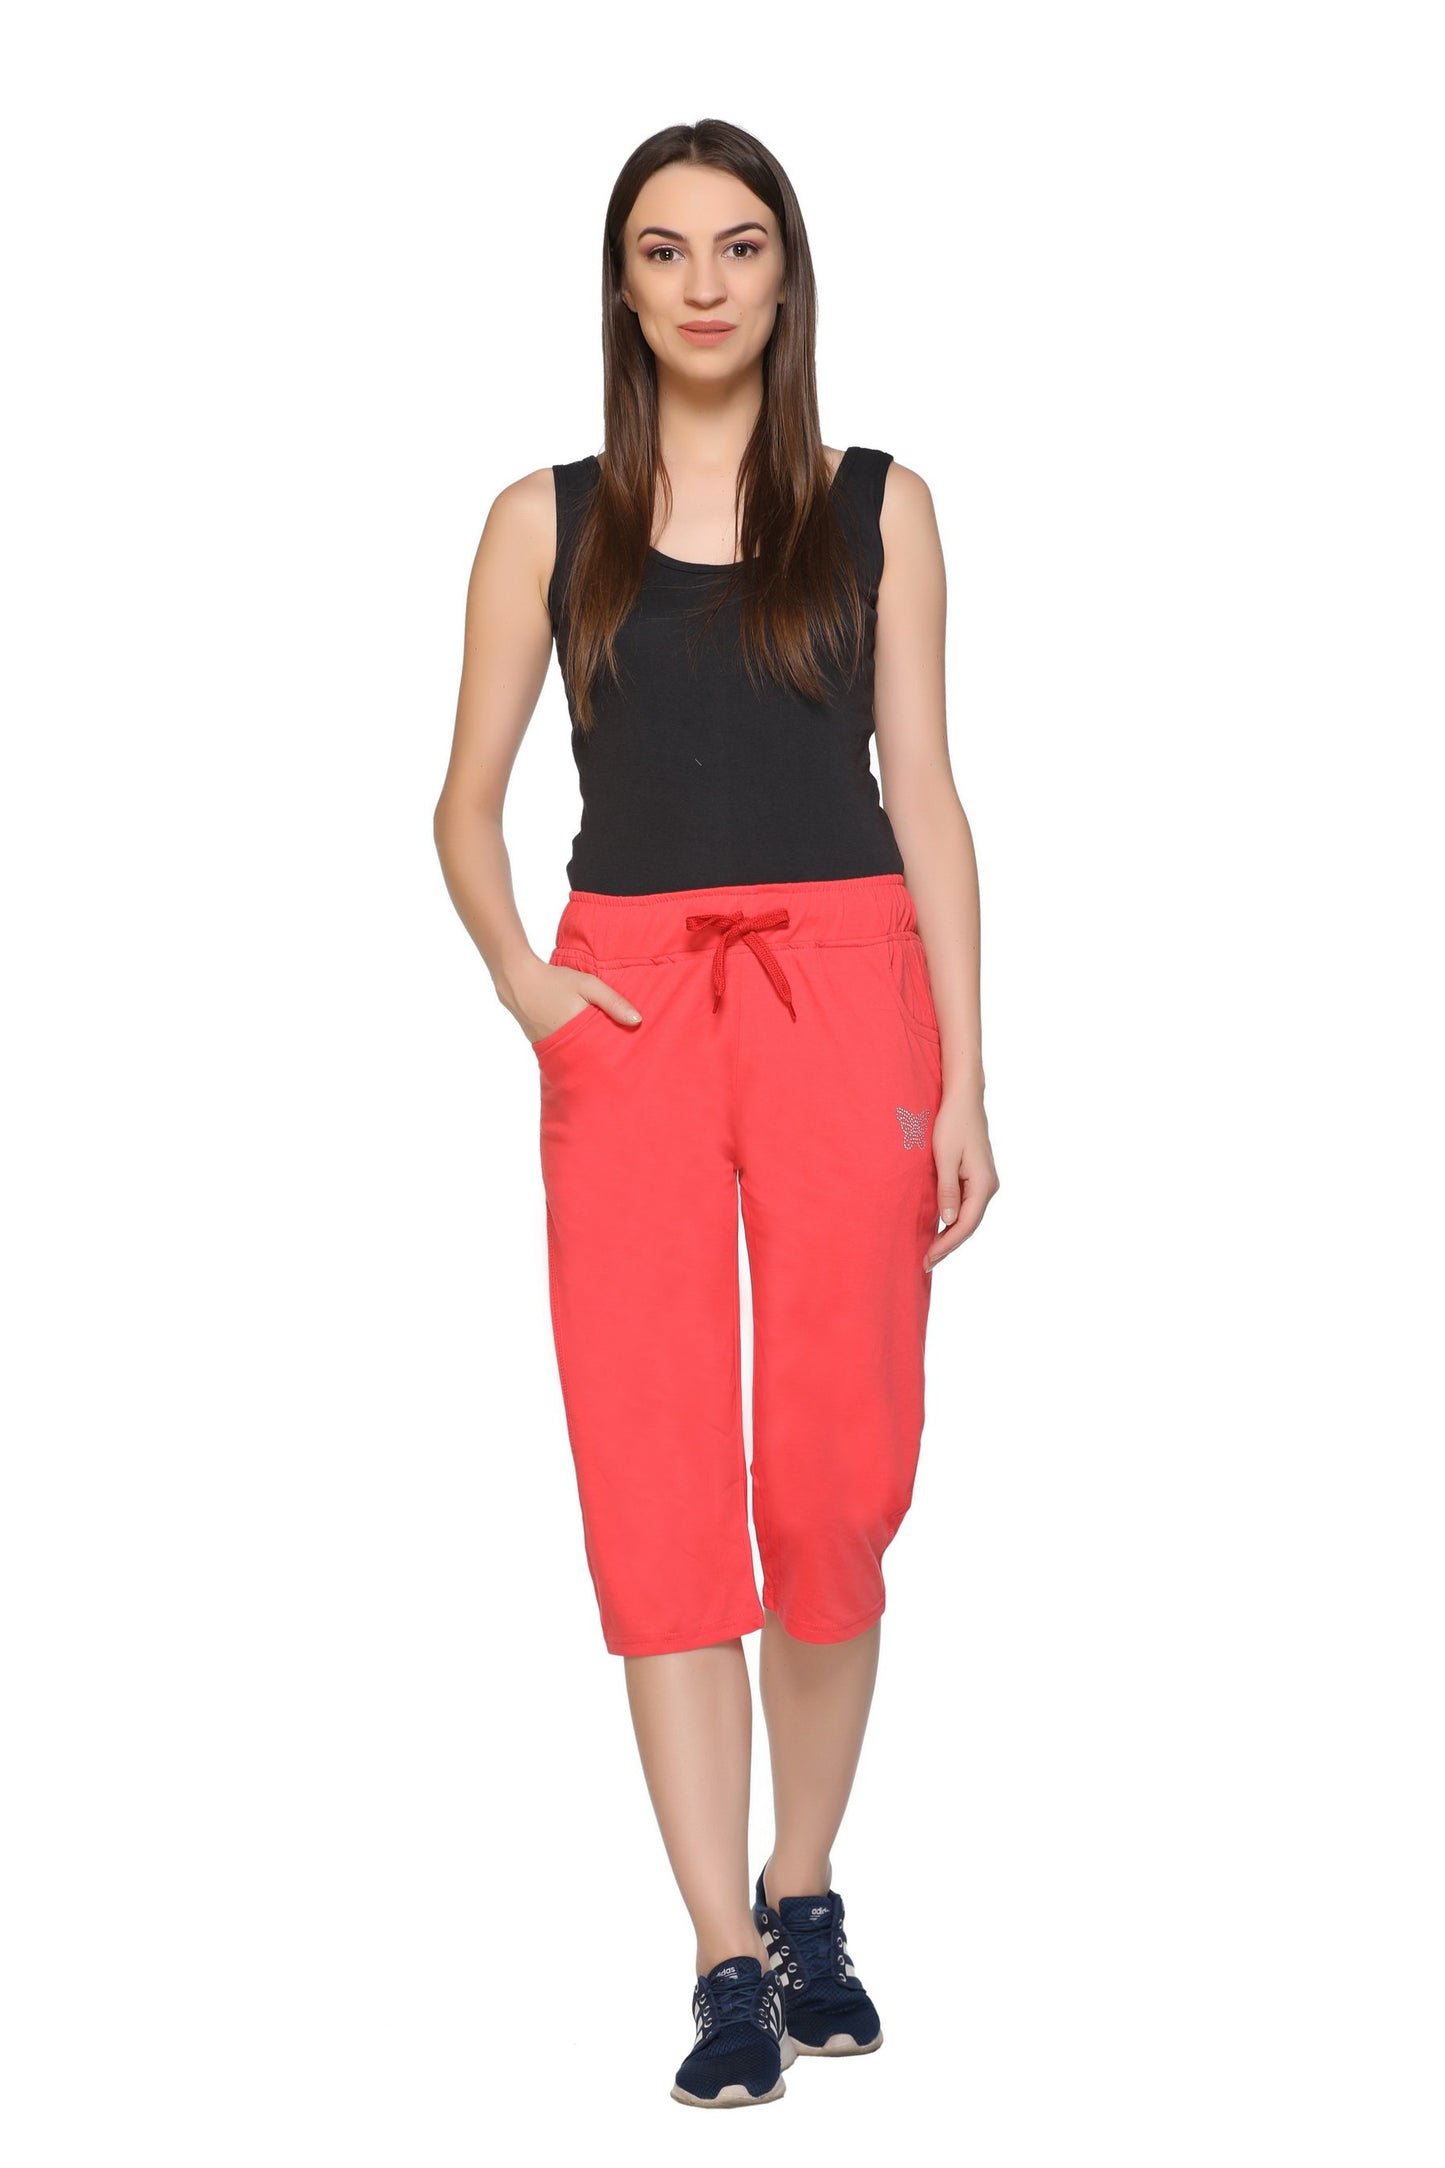 Stylish Red Cotton Half Capris For Women online in India